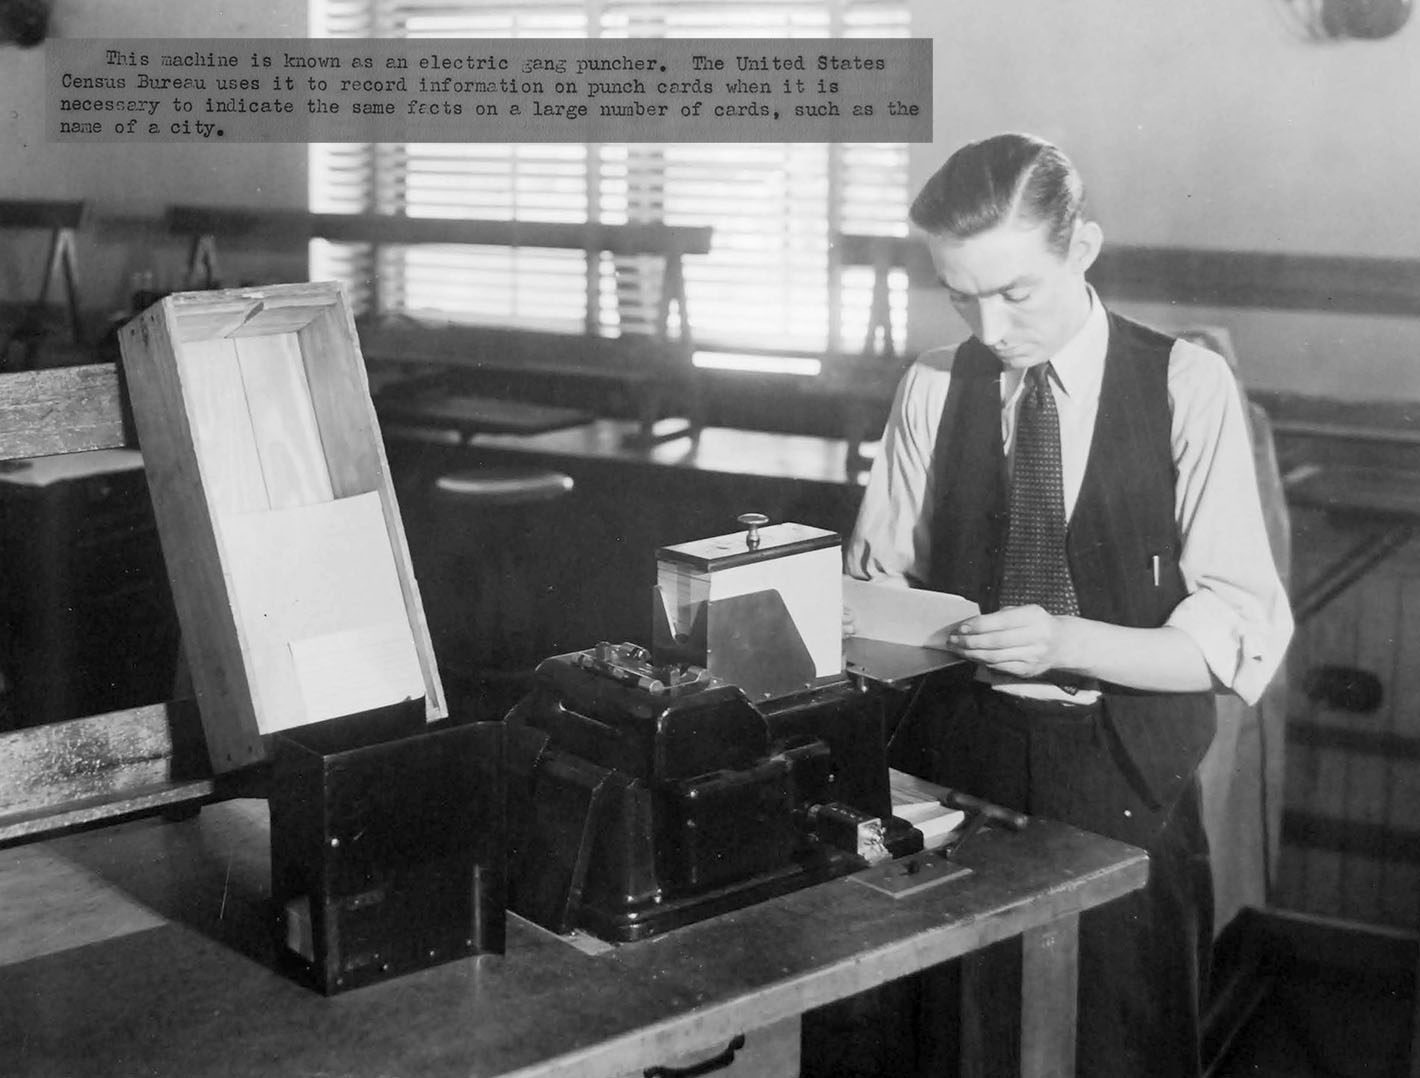 Young Woman Operating Card Puncher US Census Bureau Old Photo 